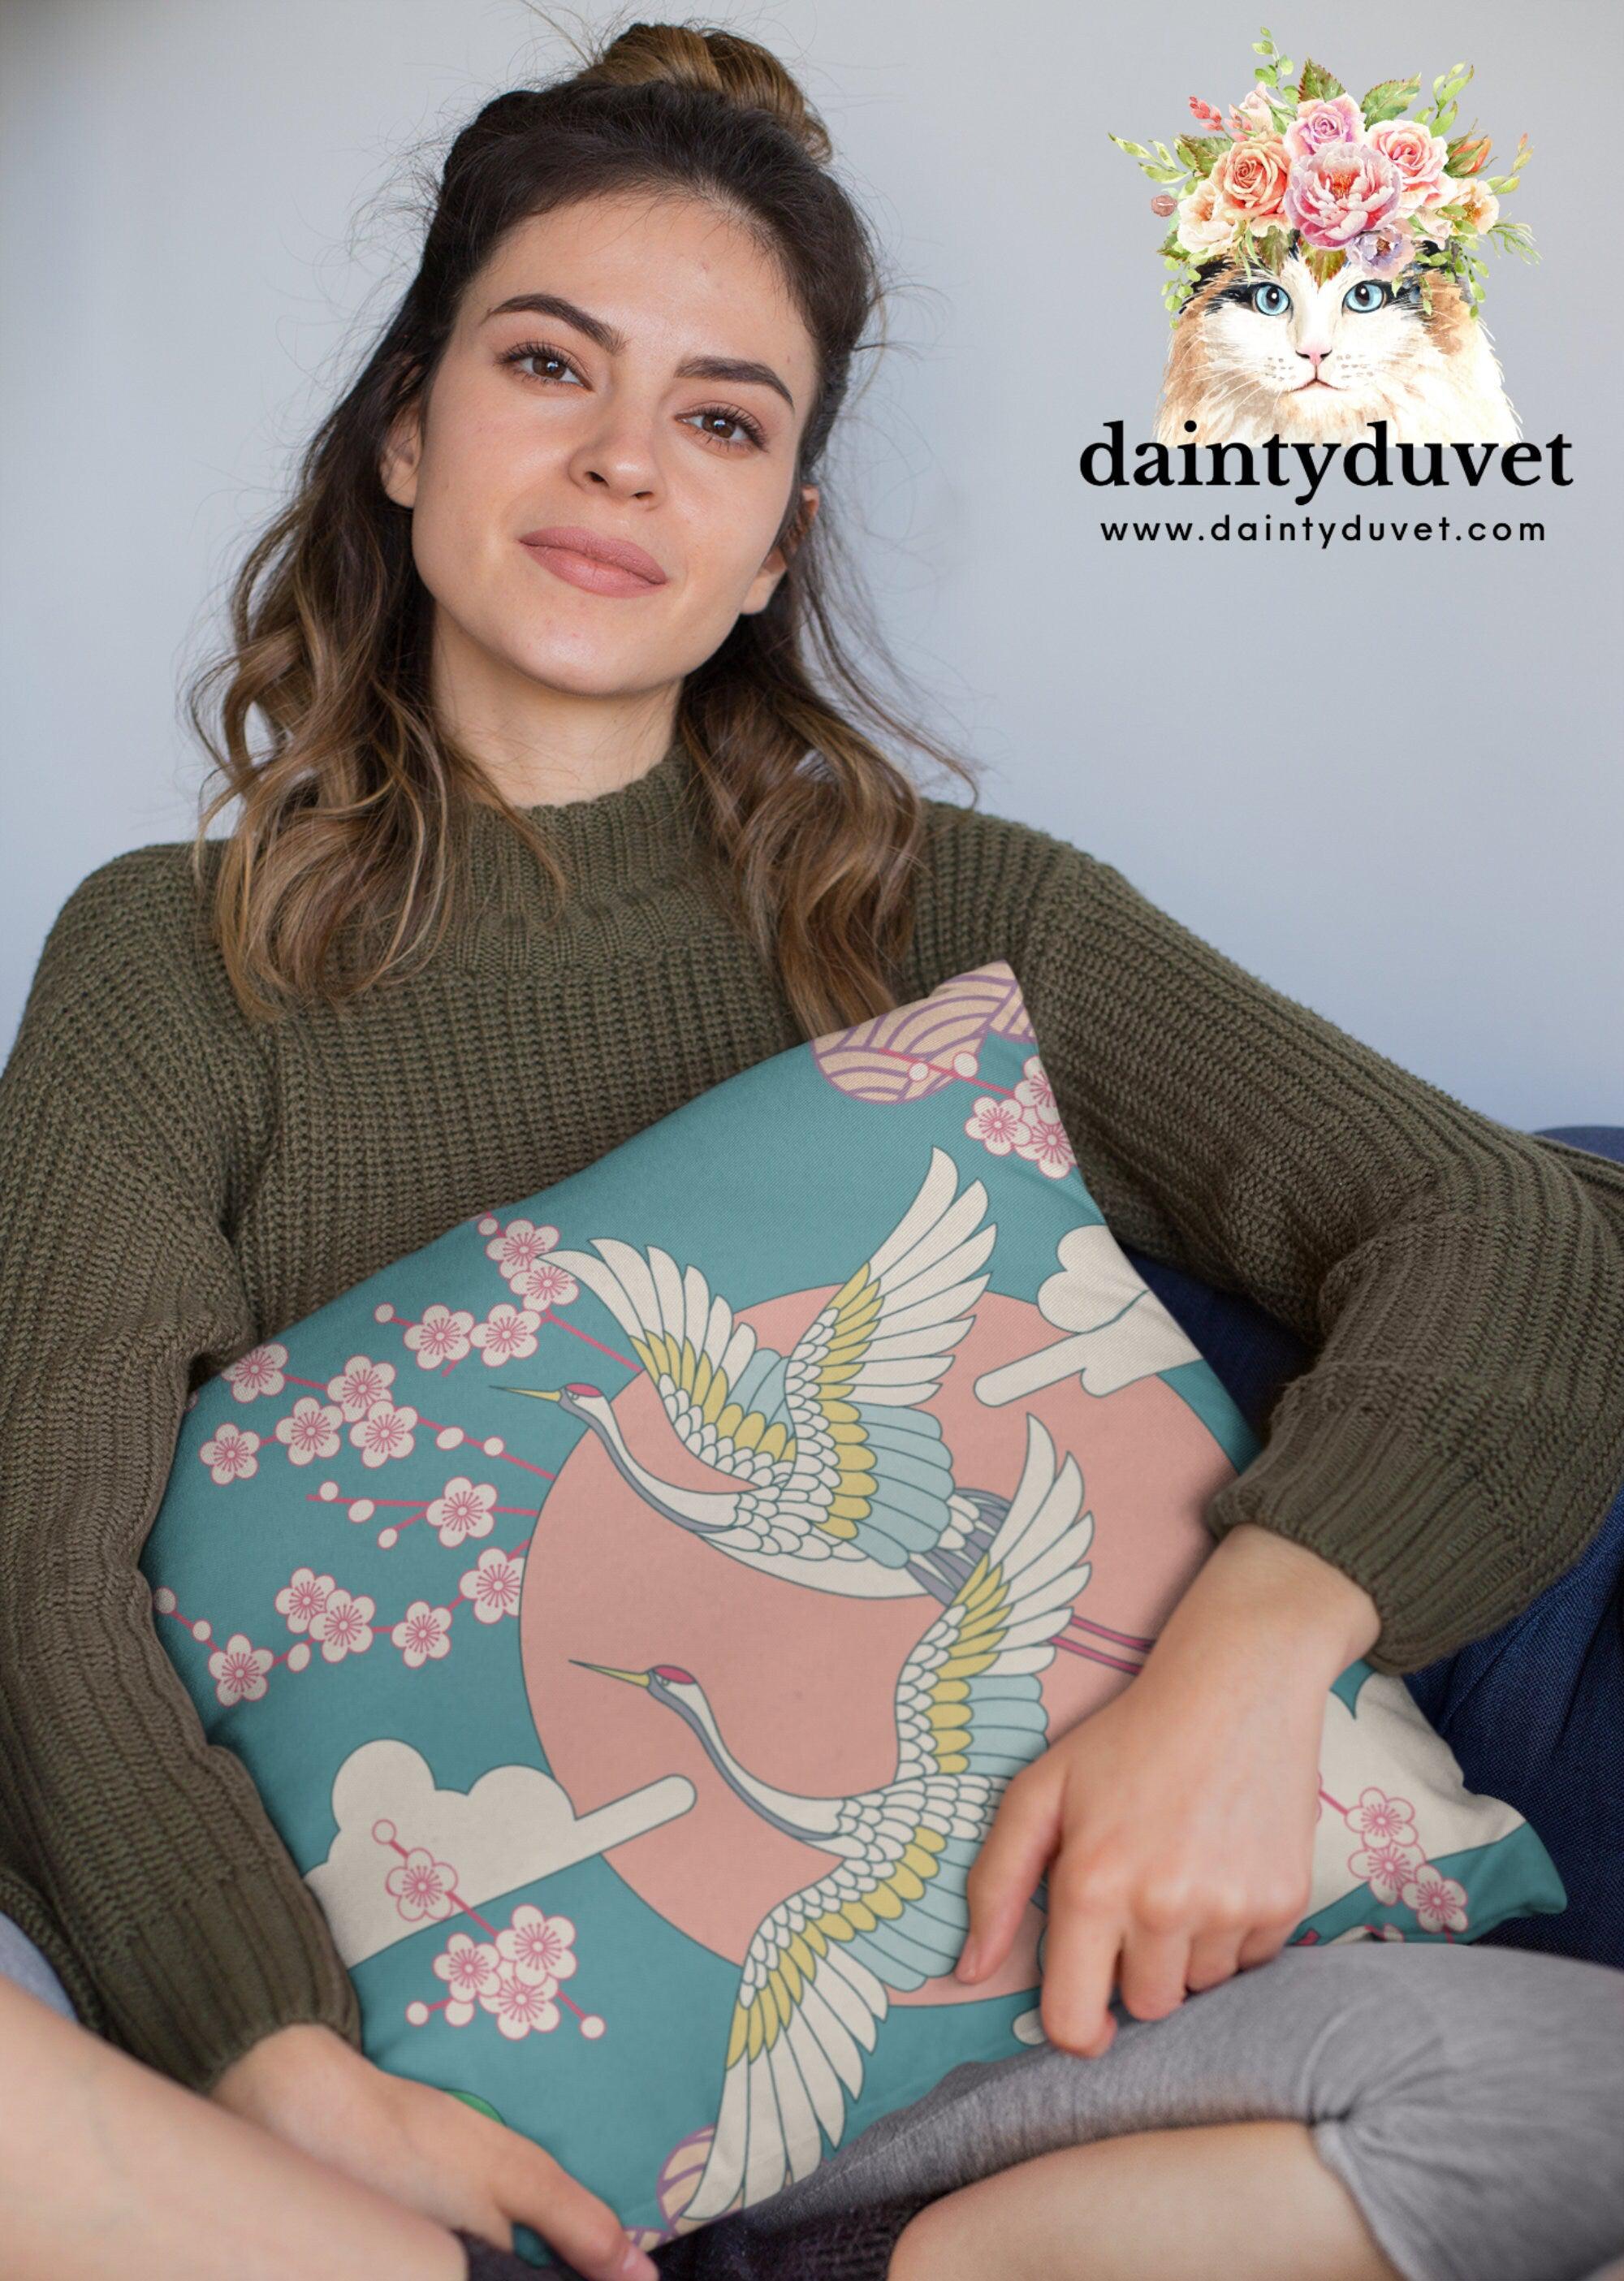 daintyduvet Green Pillowcase with Crane and Cherry Blossoms Prints, Japanese Fabric Chair Cushion Cover, Japanese Decor Square Pillow Cover for Coach